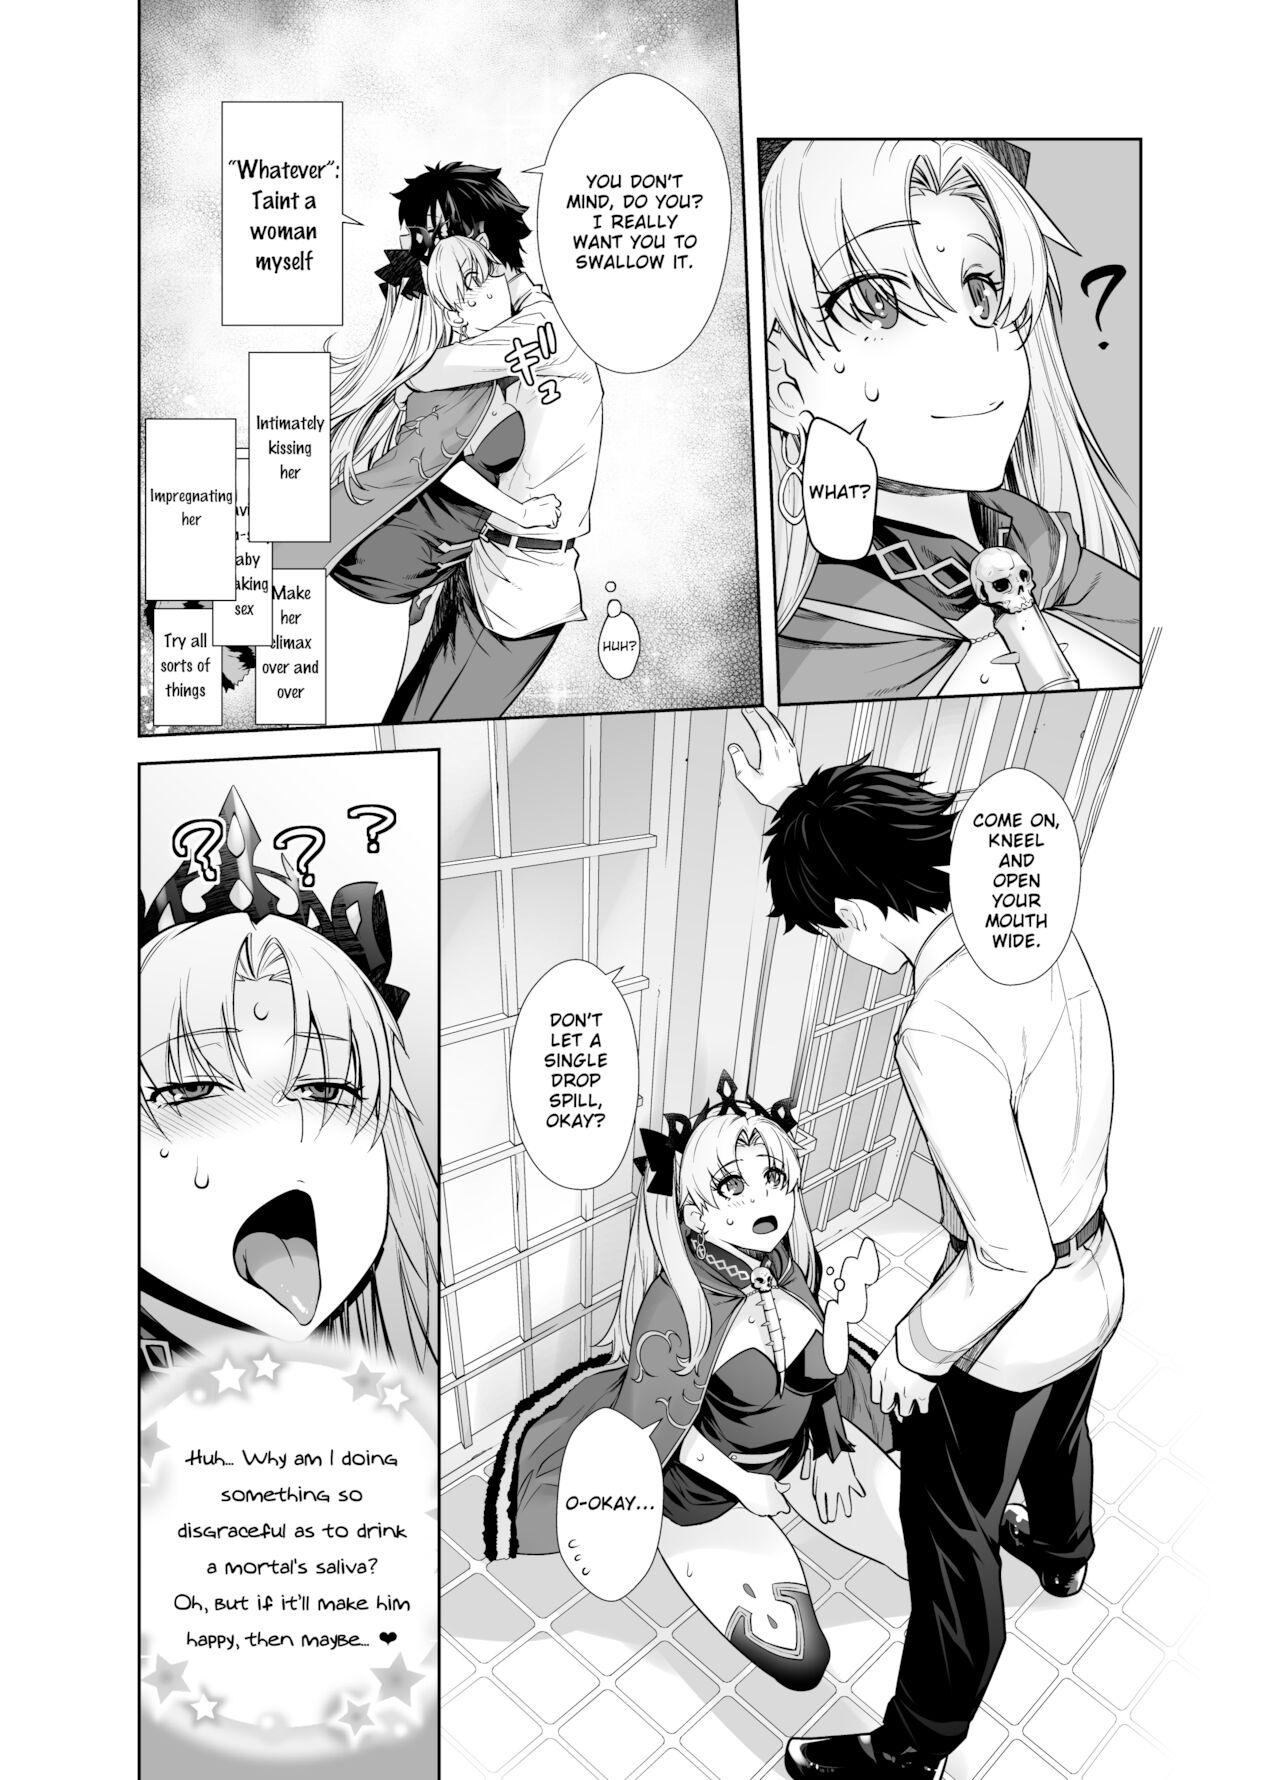 Pounded HEAVEN'S DRIVE 9 - Fate grand order Flaca - Page 7